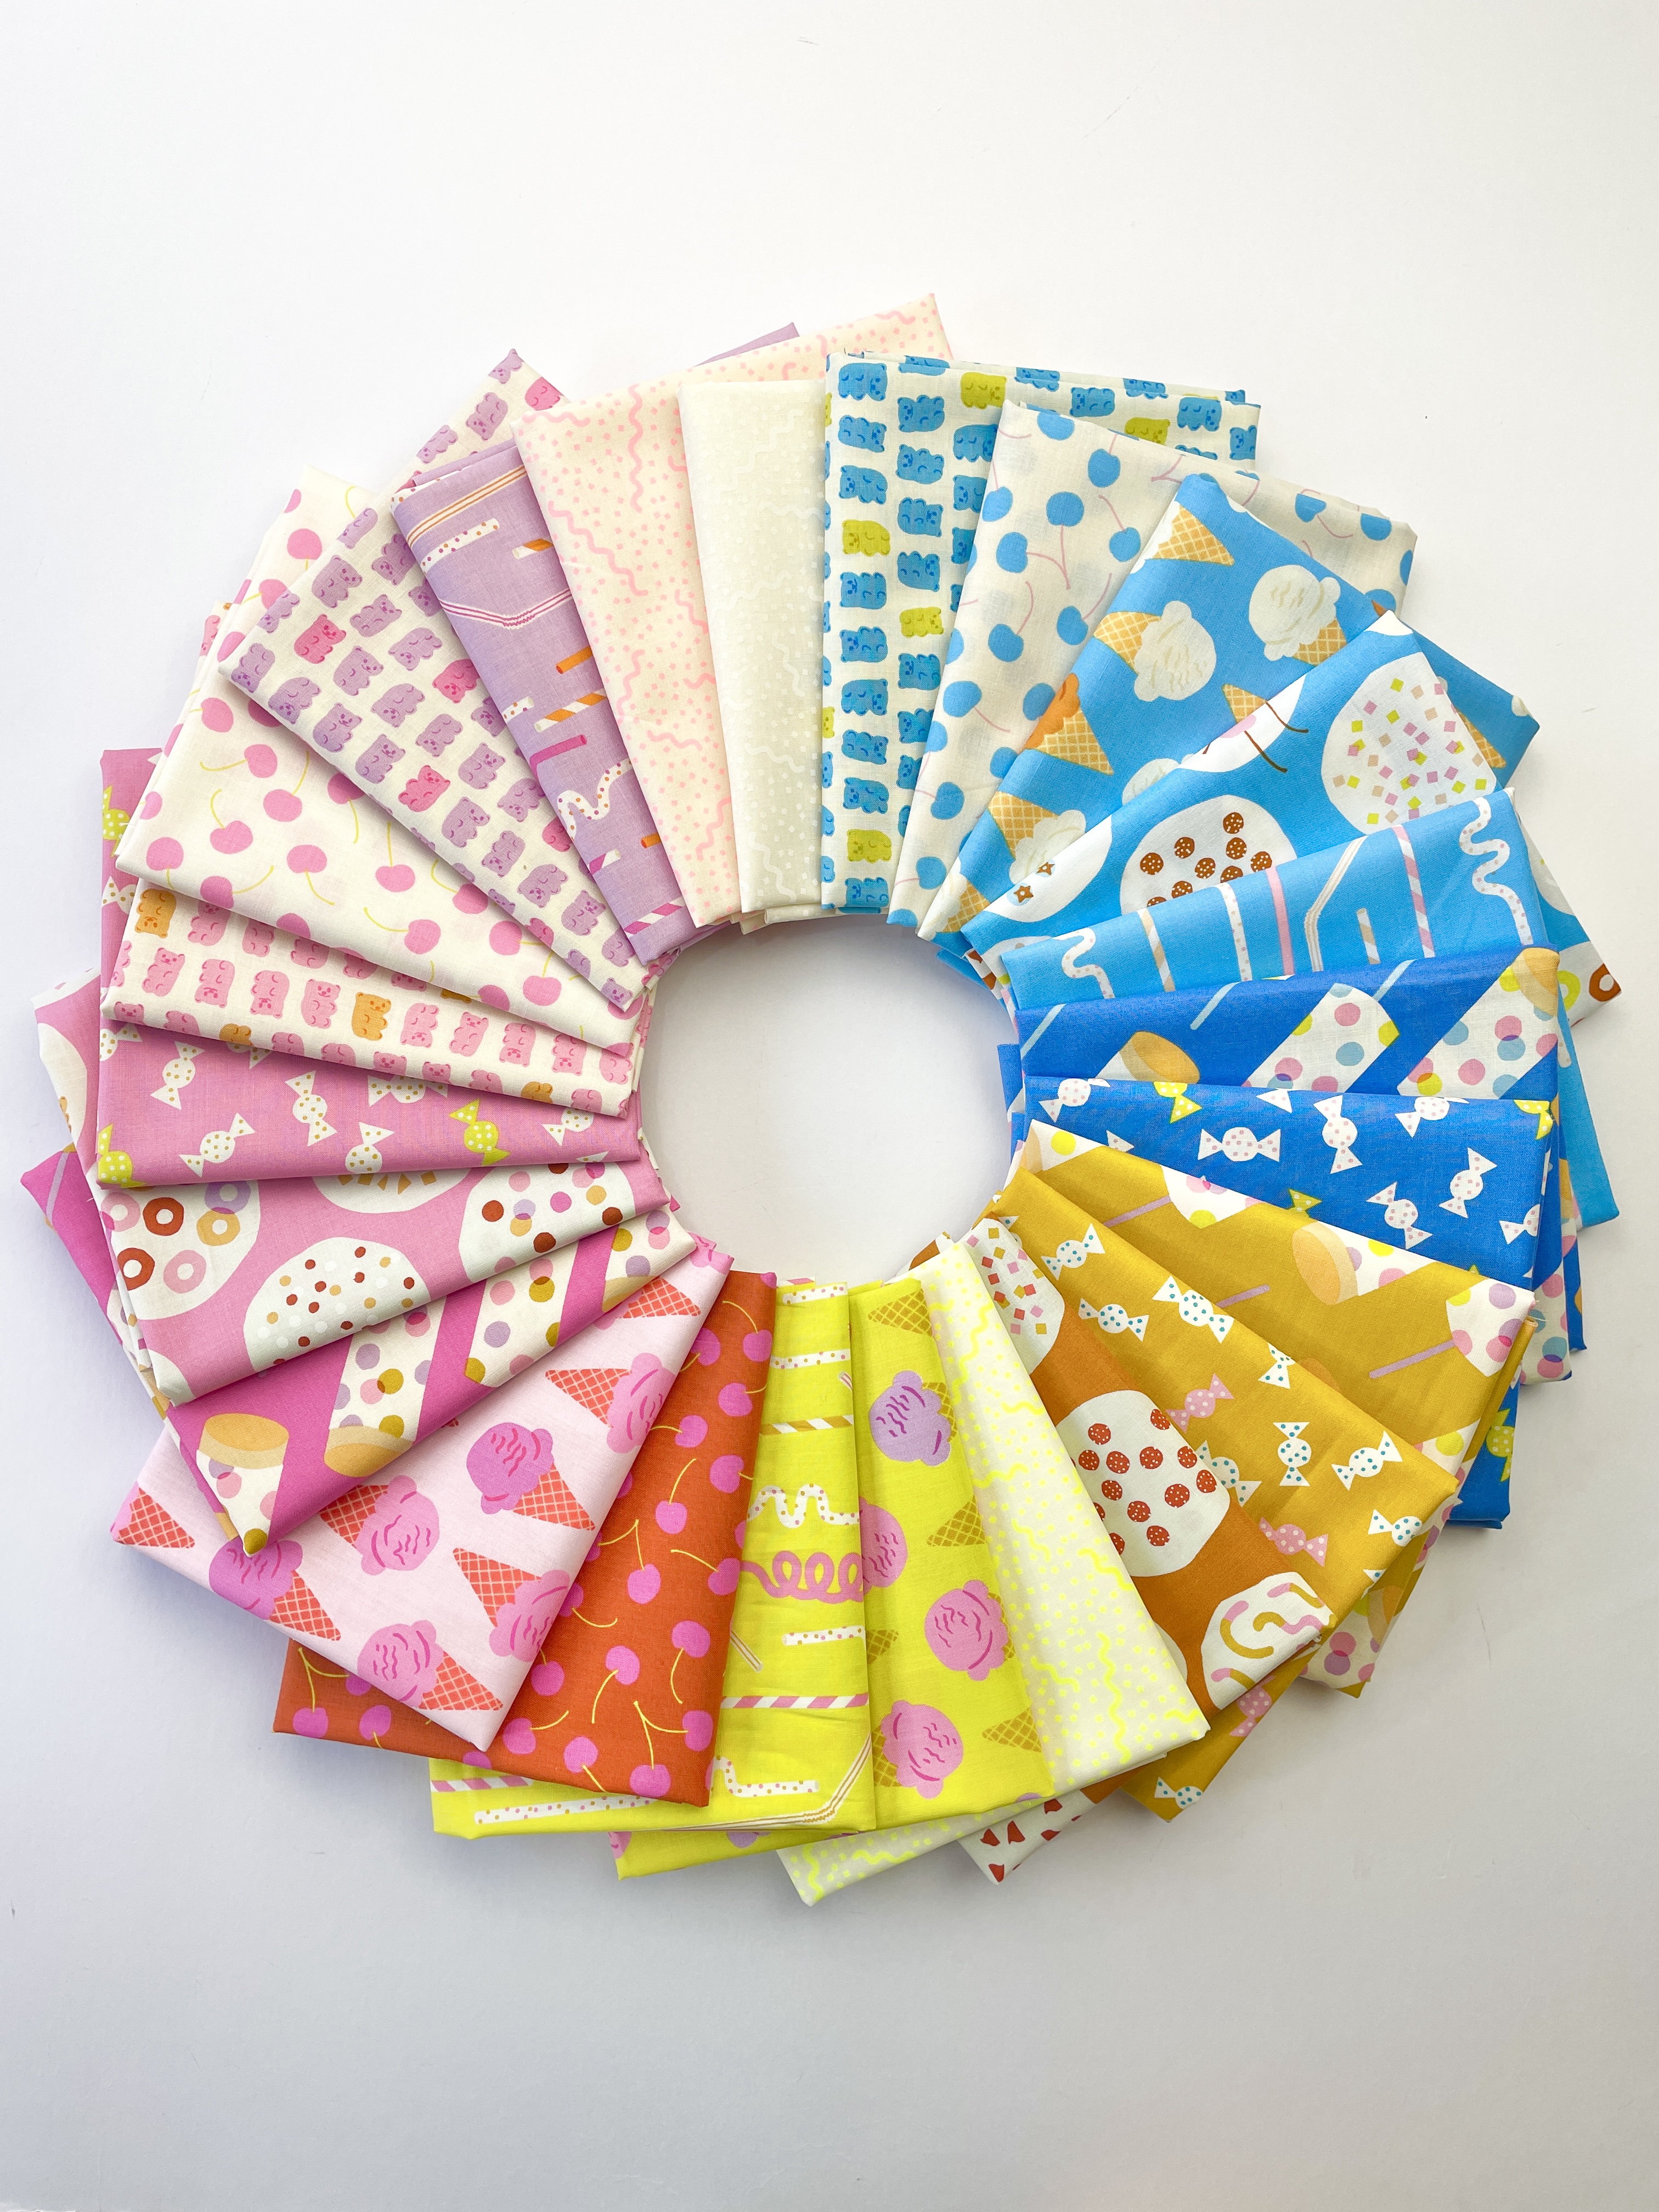 Modern patchwork and quilting fabric from the Sugar Cone collection designed by Kimberly Kight for Ruby Star Society